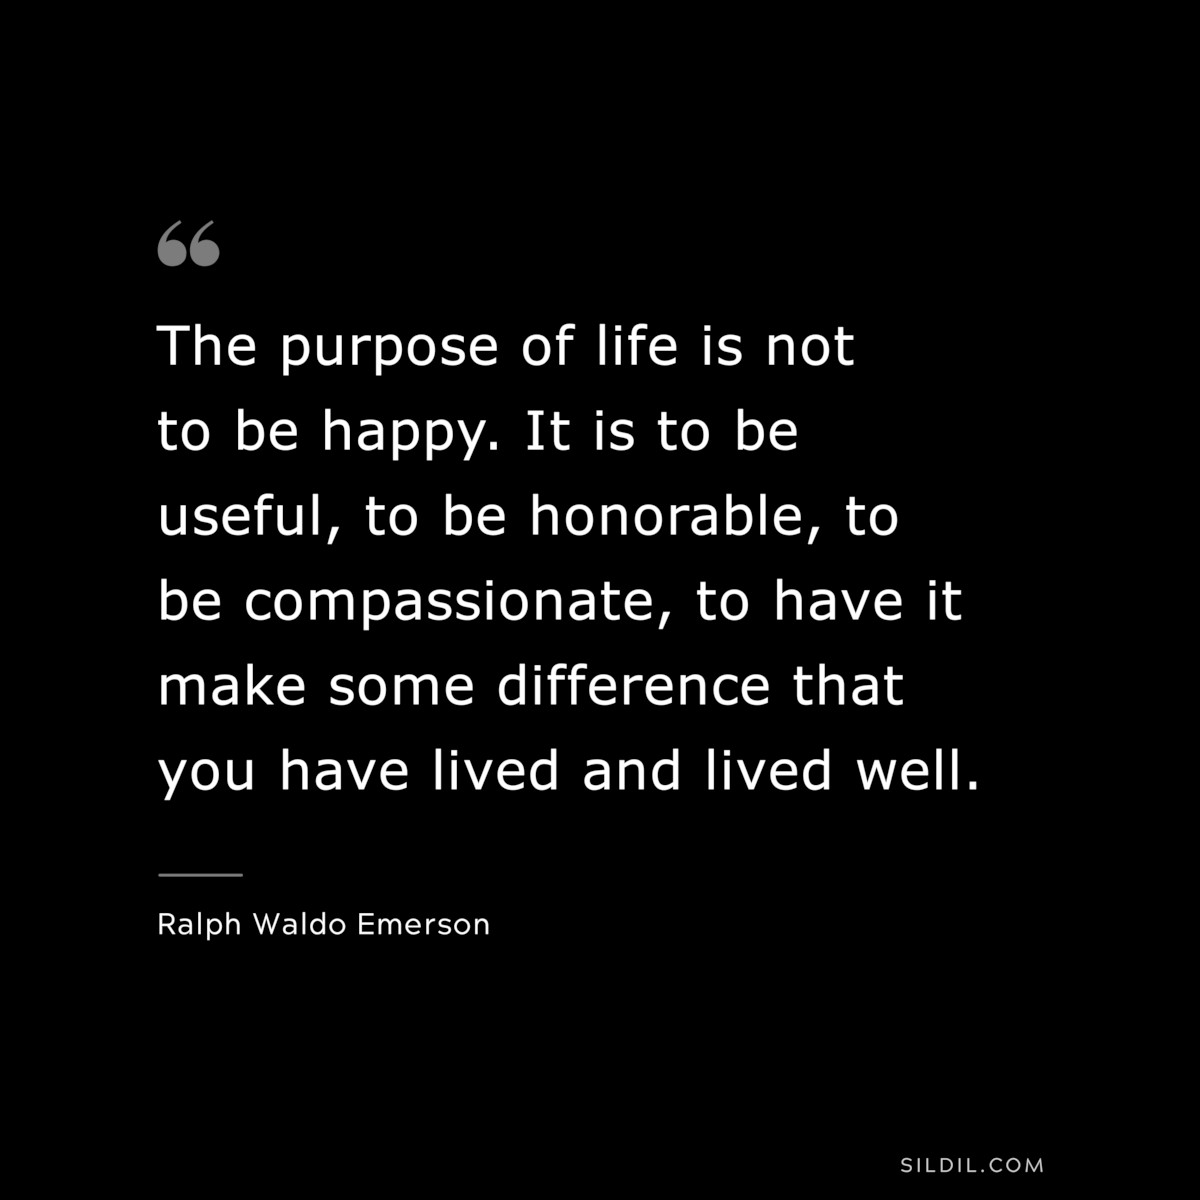 The purpose of life is not to be happy. It is to be useful, to be honorable, to be compassionate, to have it make some difference that you have lived and lived well. — Ralph Waldo Emerson